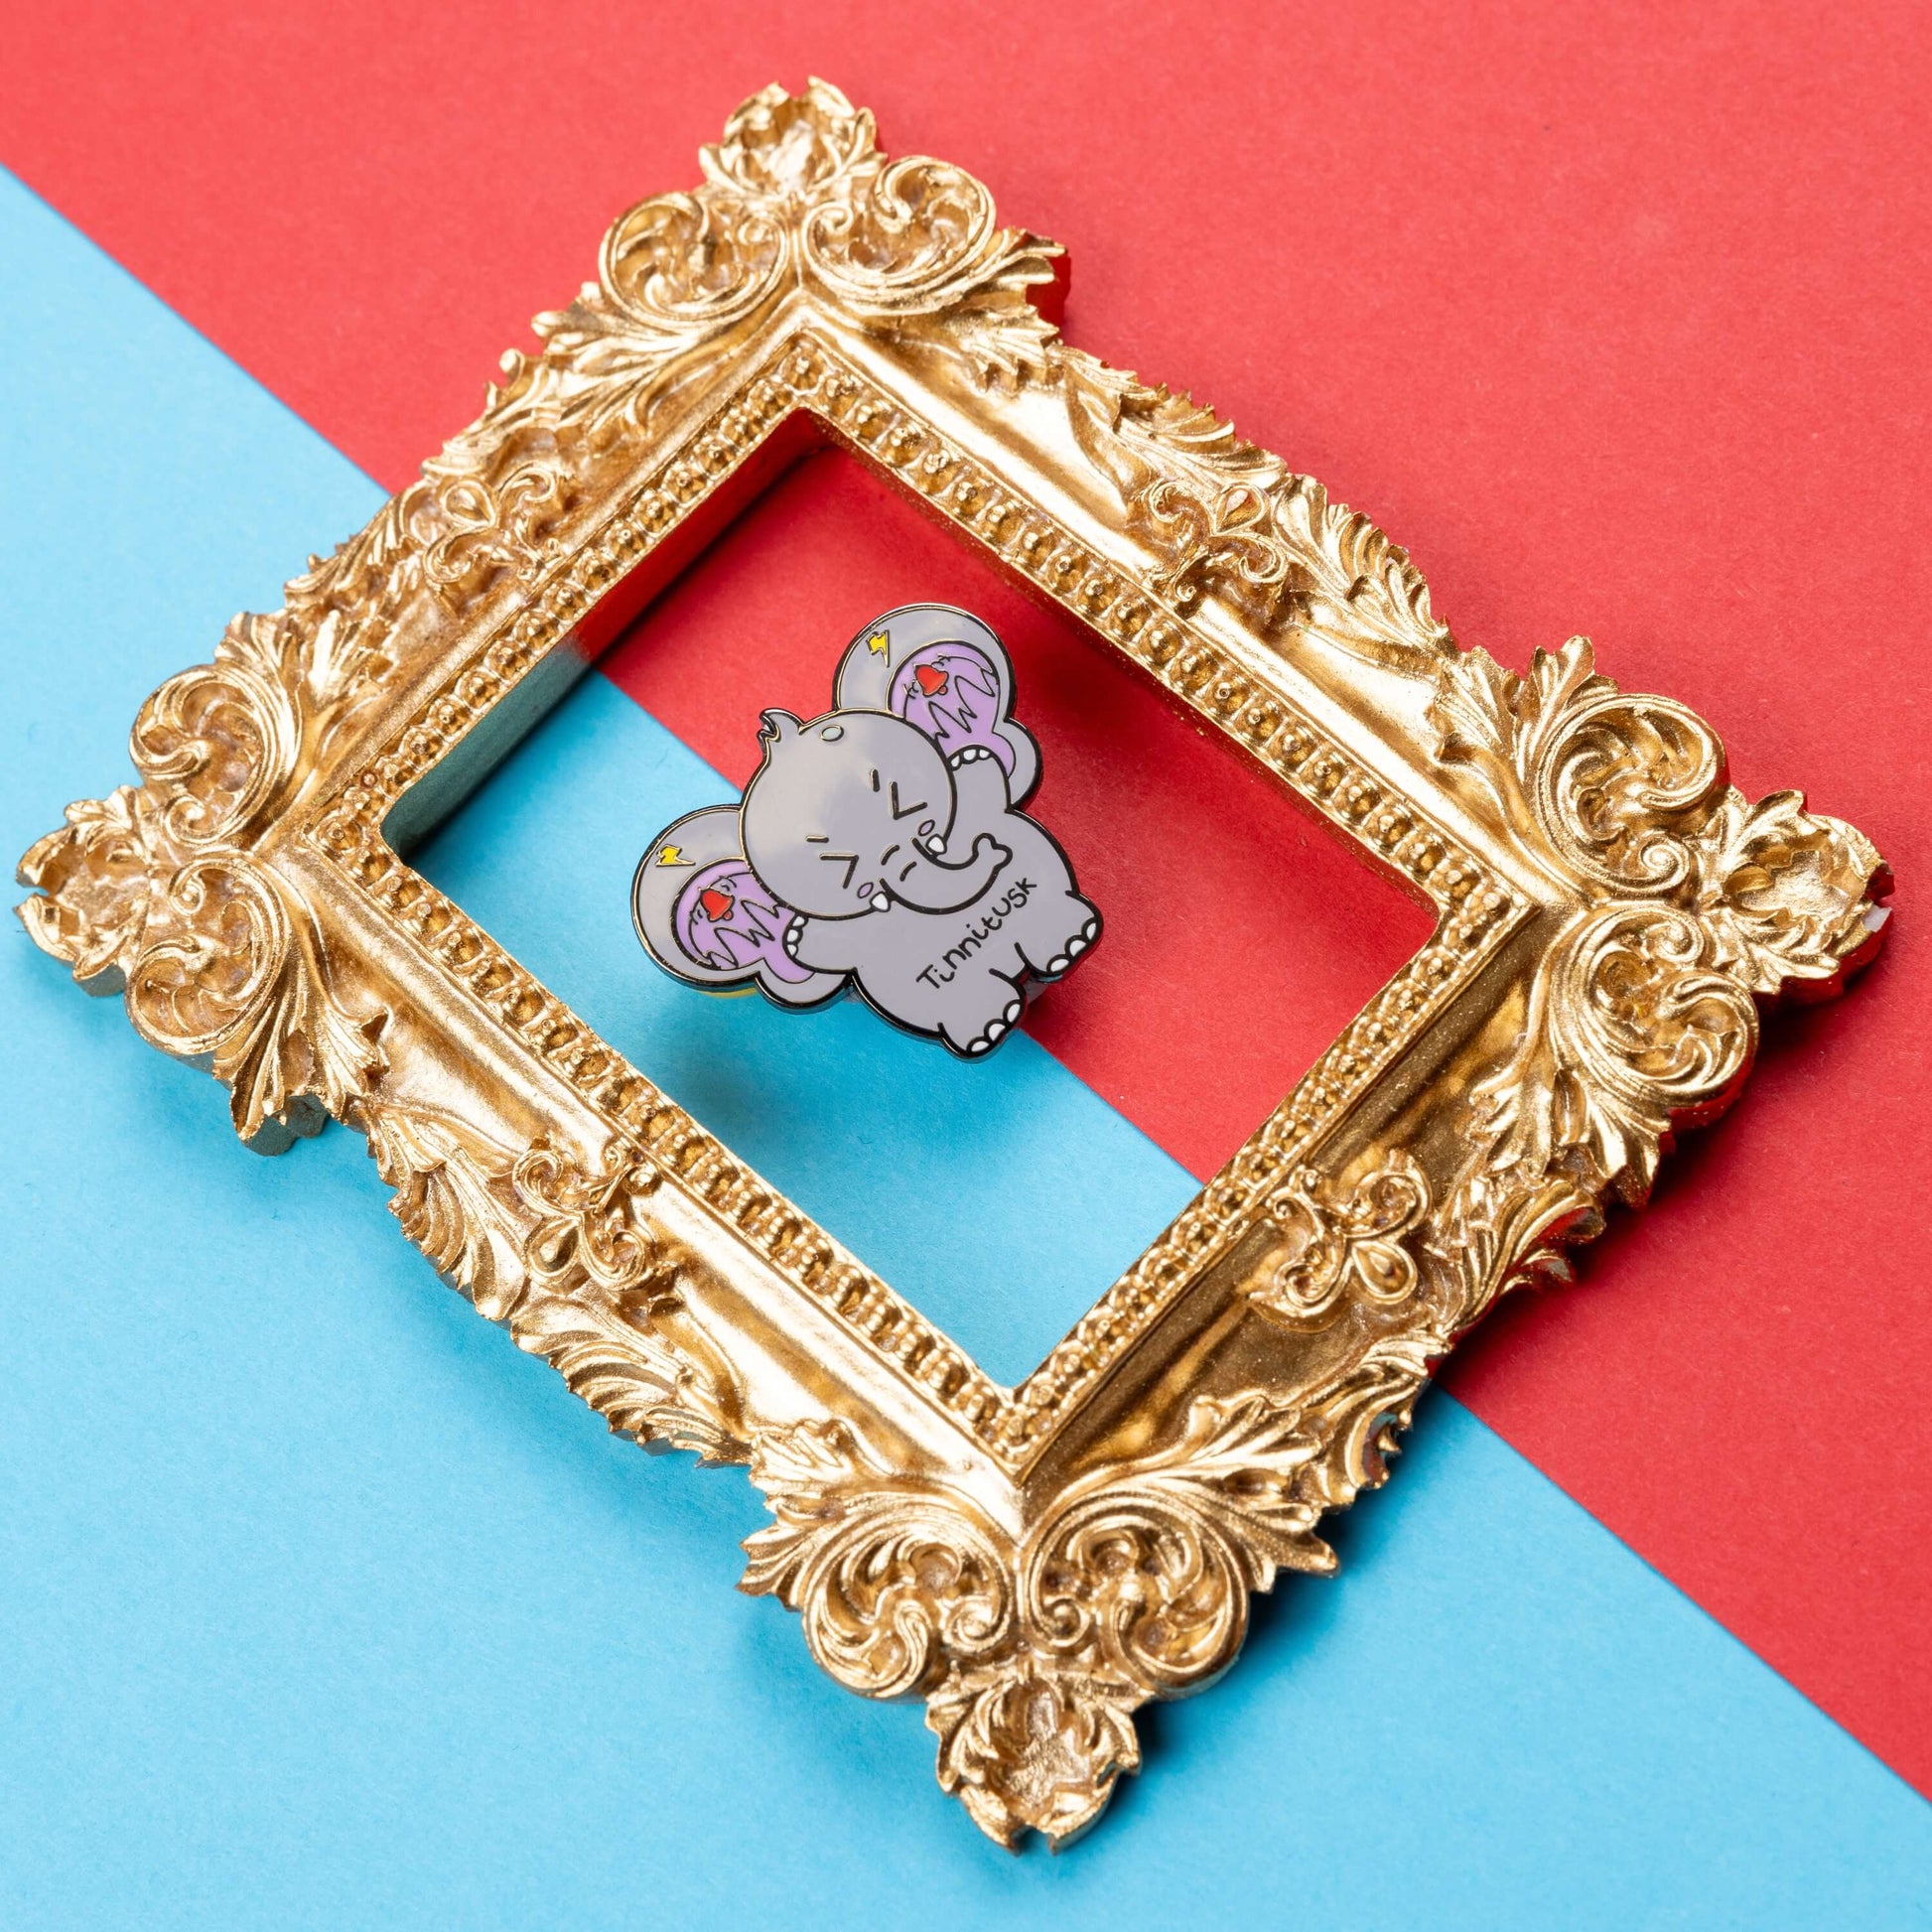 Tinnitus Enamel Pin on blue and red card inside a gold ornate frame. A grey elephant shaped enamel pin with big ears with purple on the inside of them and black squiggly lines with red ringing alarm bells above the lines and yellow lightening bolts above the bells. The elephant has its eyes screwed shut and its arms up. 'Tinnitusk' is written in black across its middle.